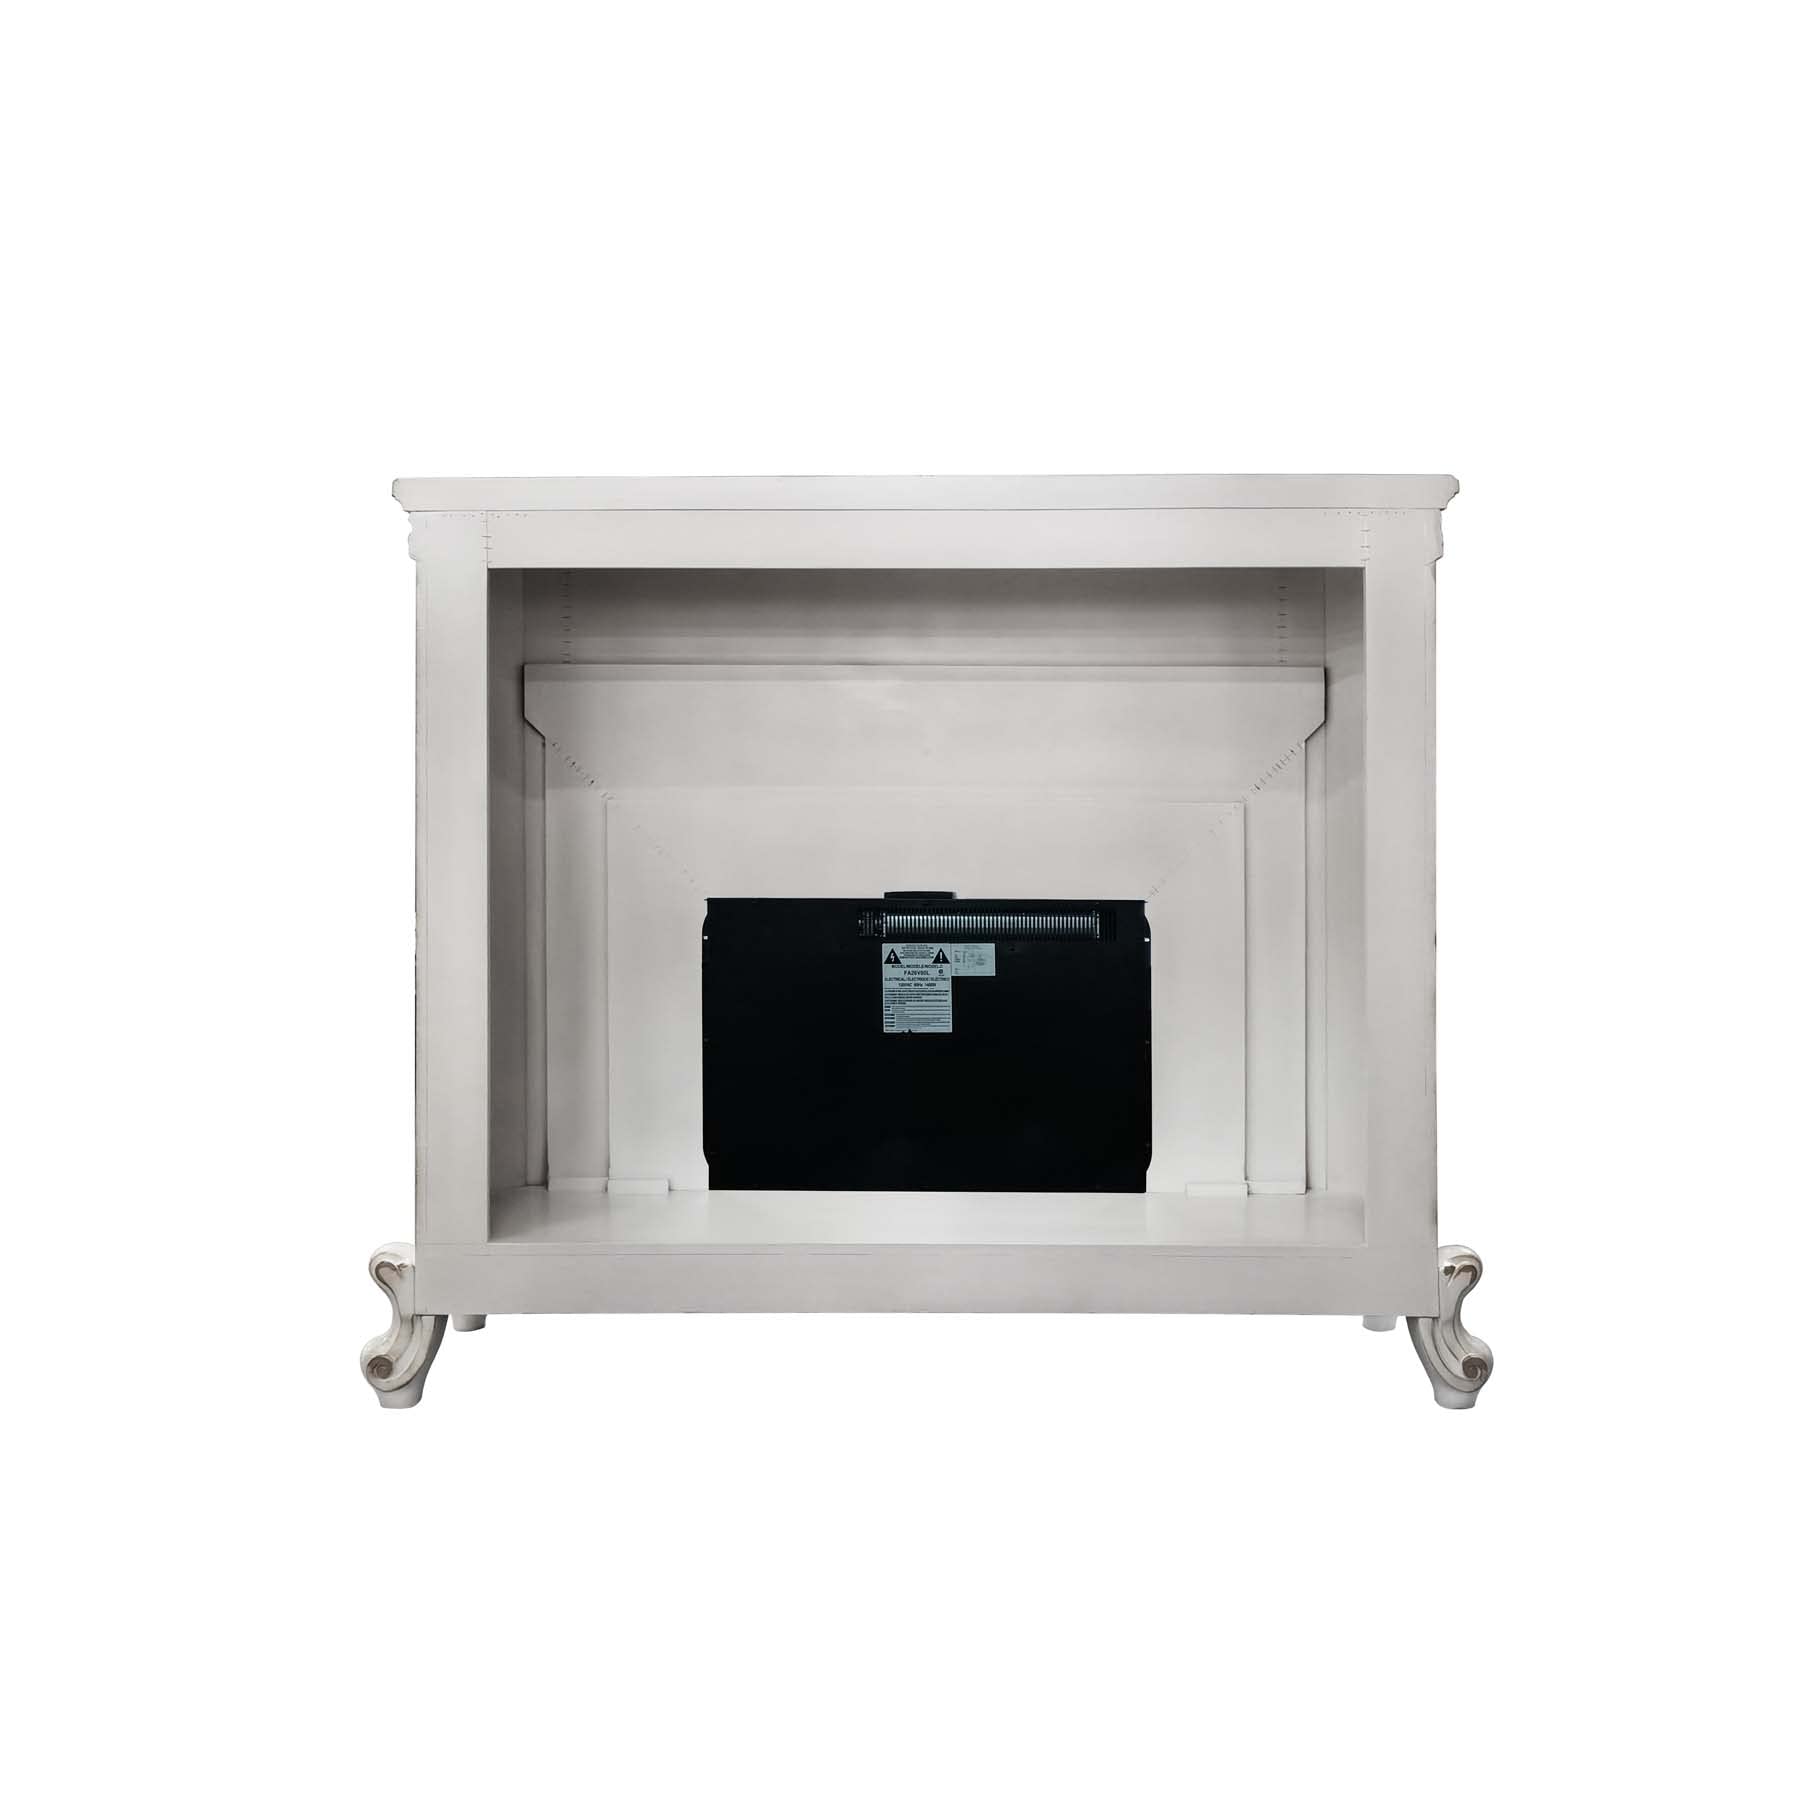 Picardy Fireplace in Antique Pearl Finish